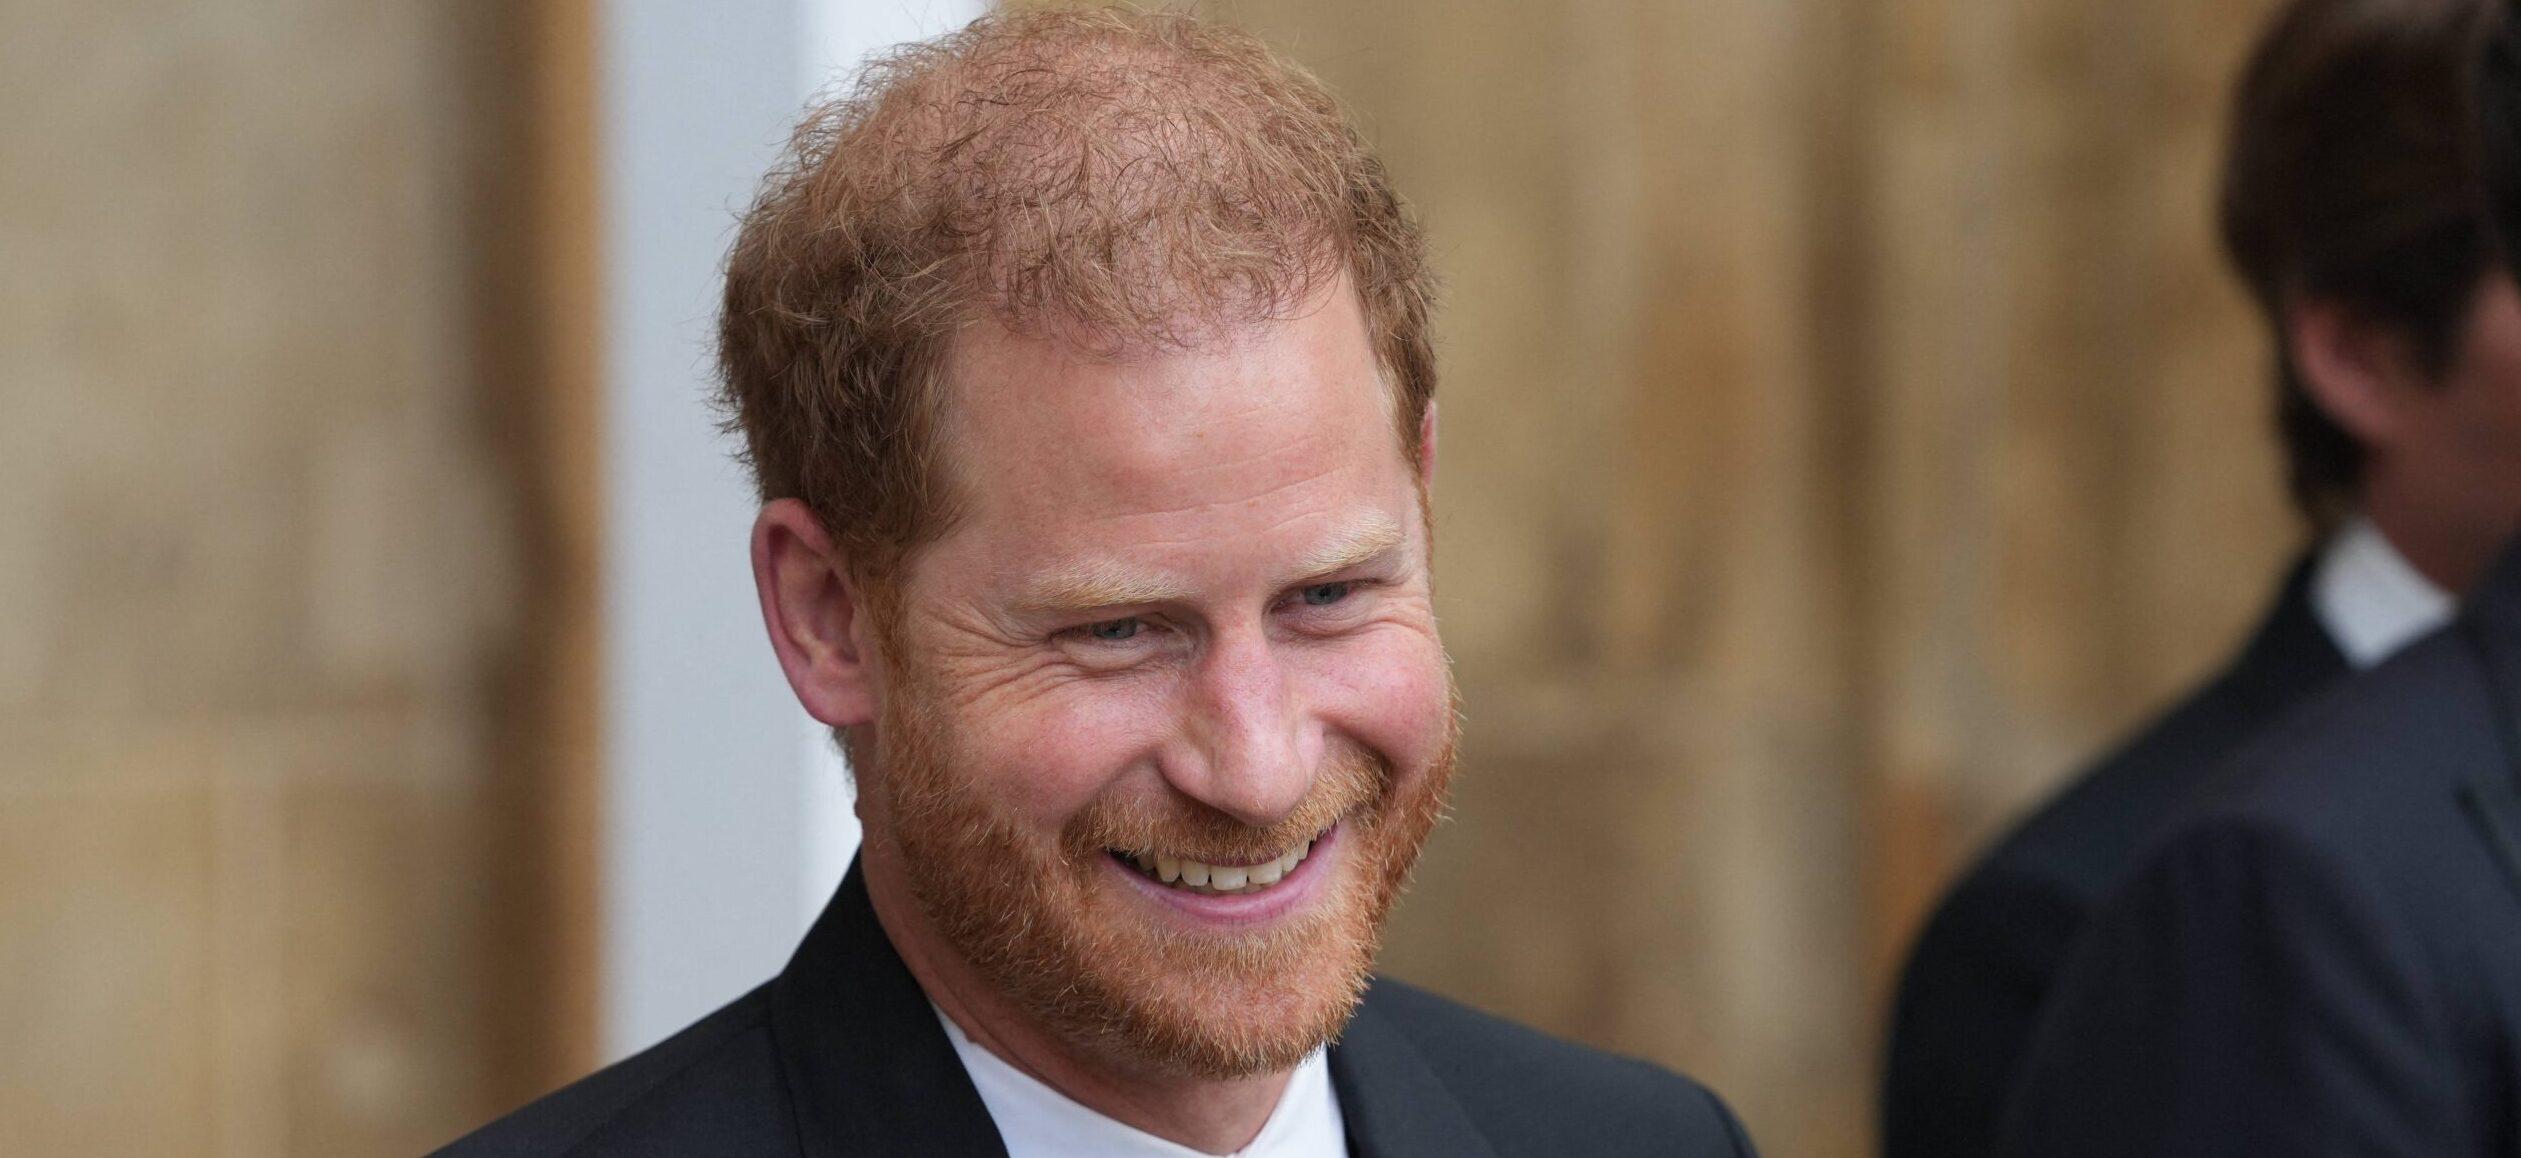 Prince Harry Flaunts Military Medals While Attempting Stand-Up Comedy